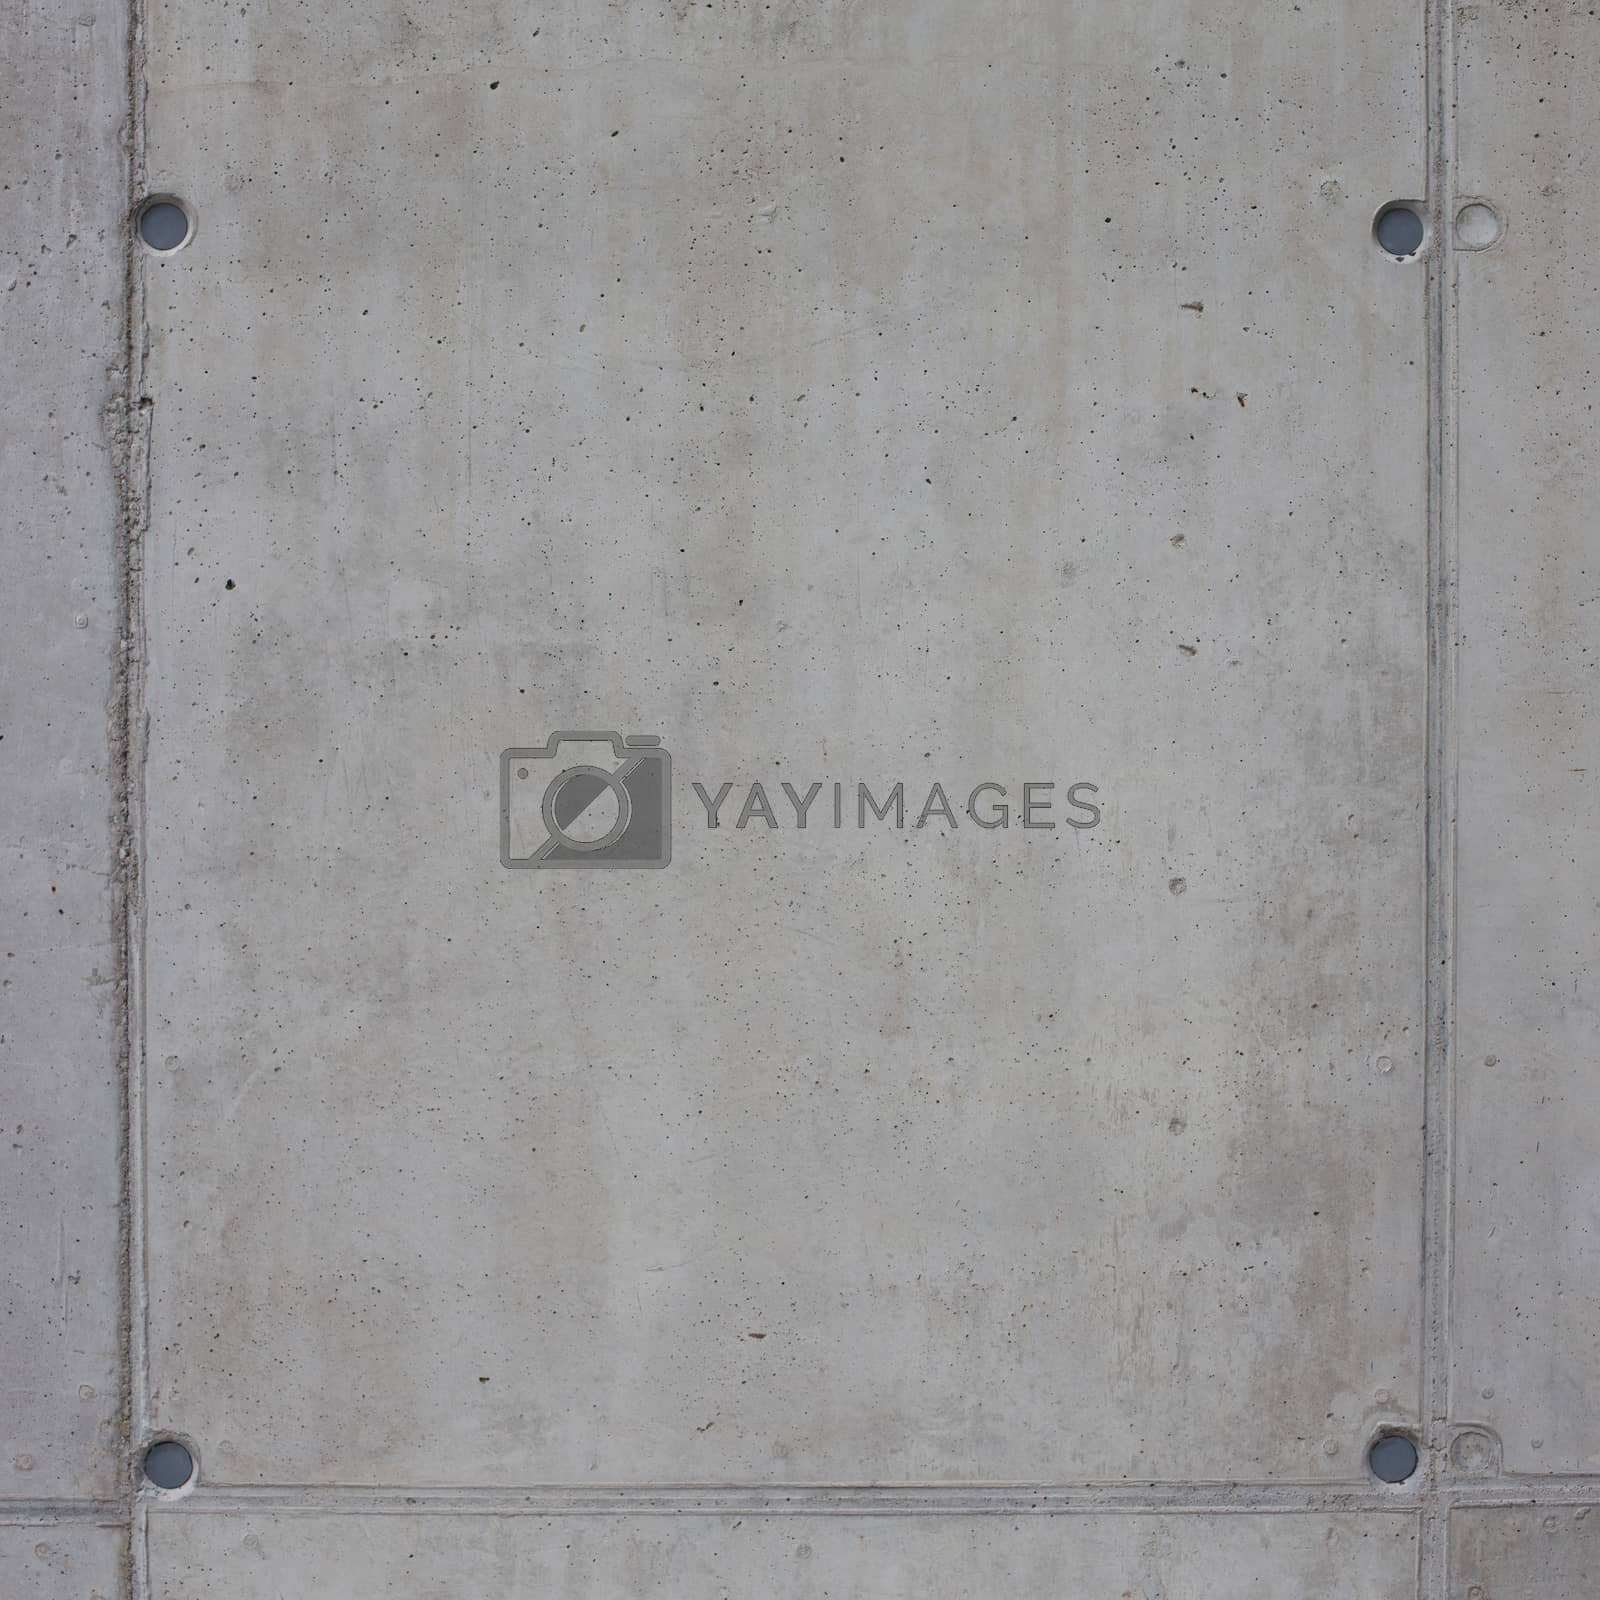 Royalty free image of Concrete Texture Background by RTsubin